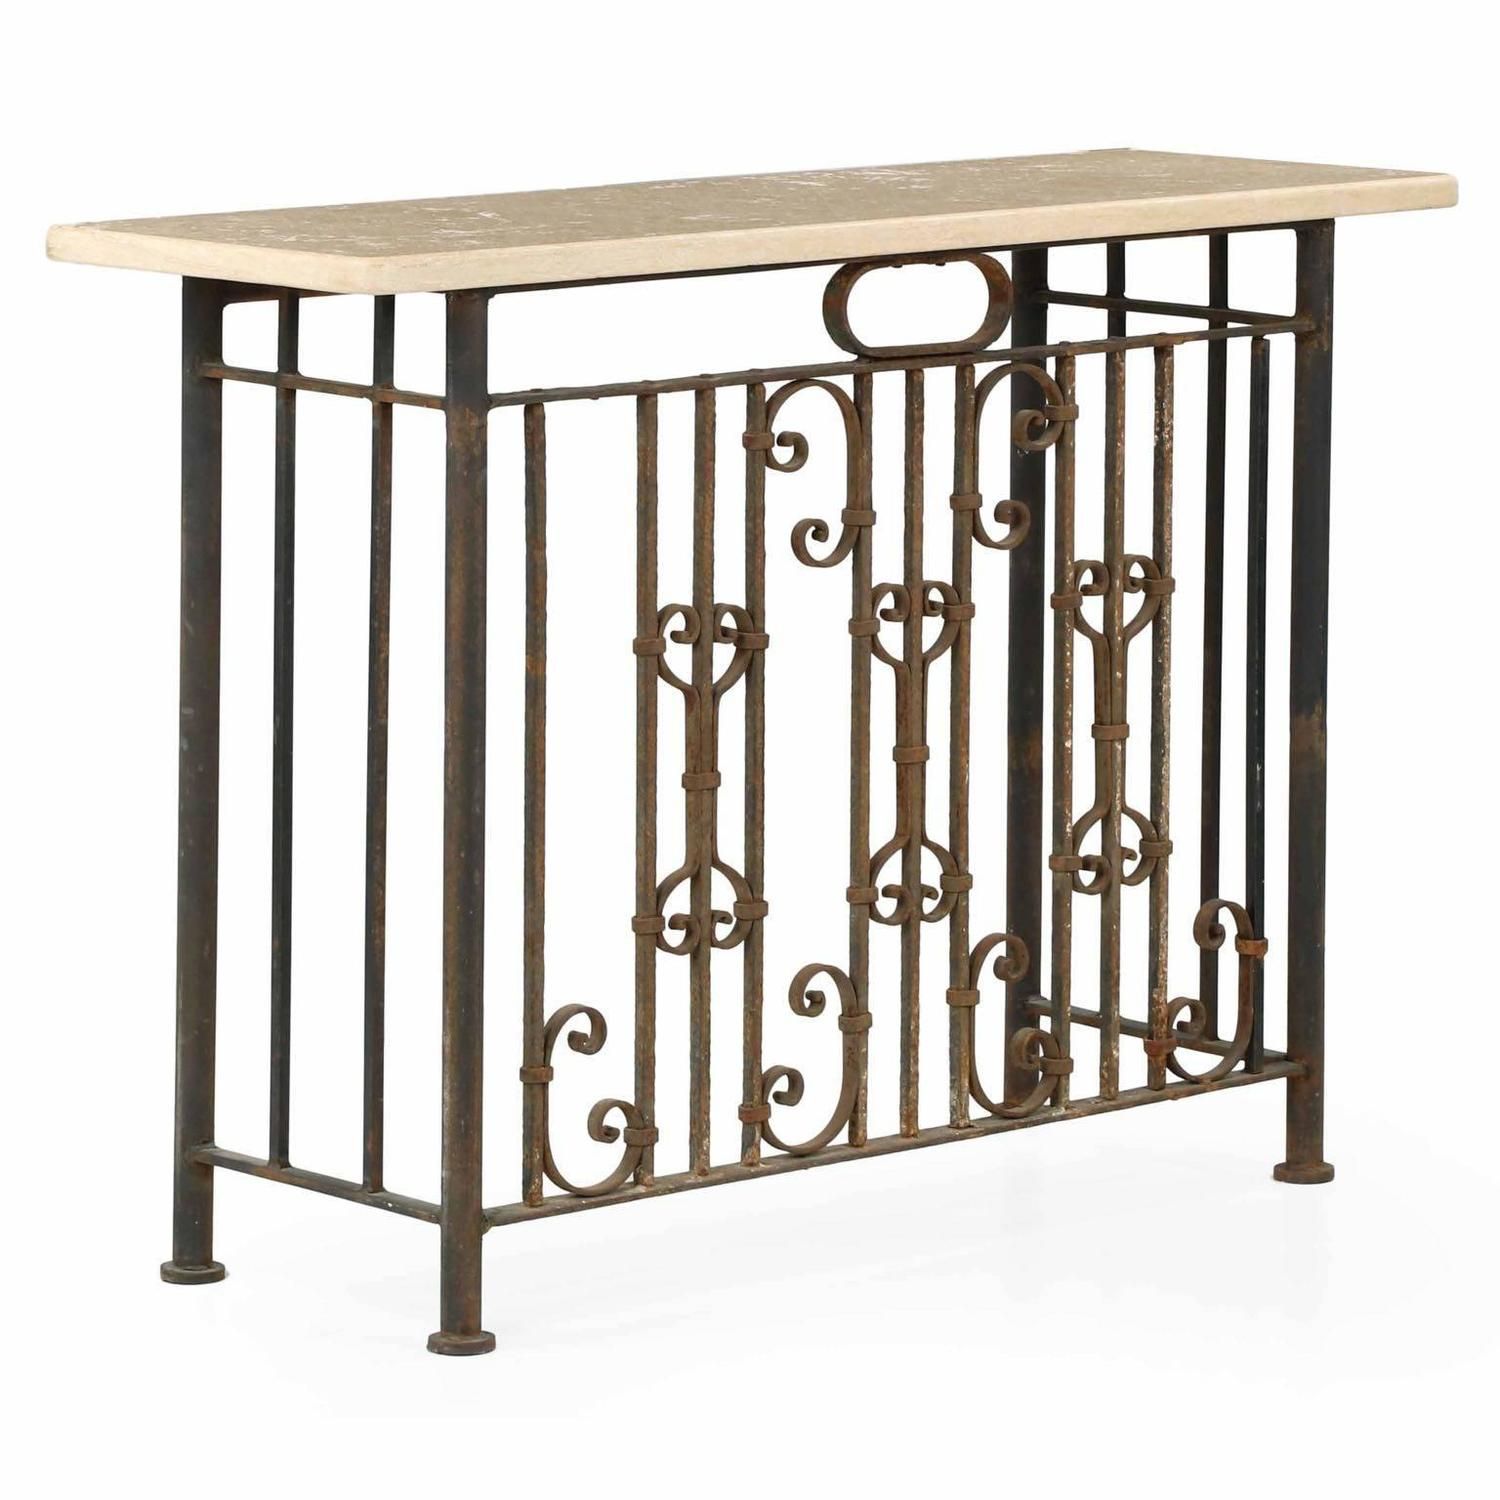 Stone Top Wrought Iron Antique Console Table, Late 19th Inside Round Iron Console Tables (View 16 of 20)